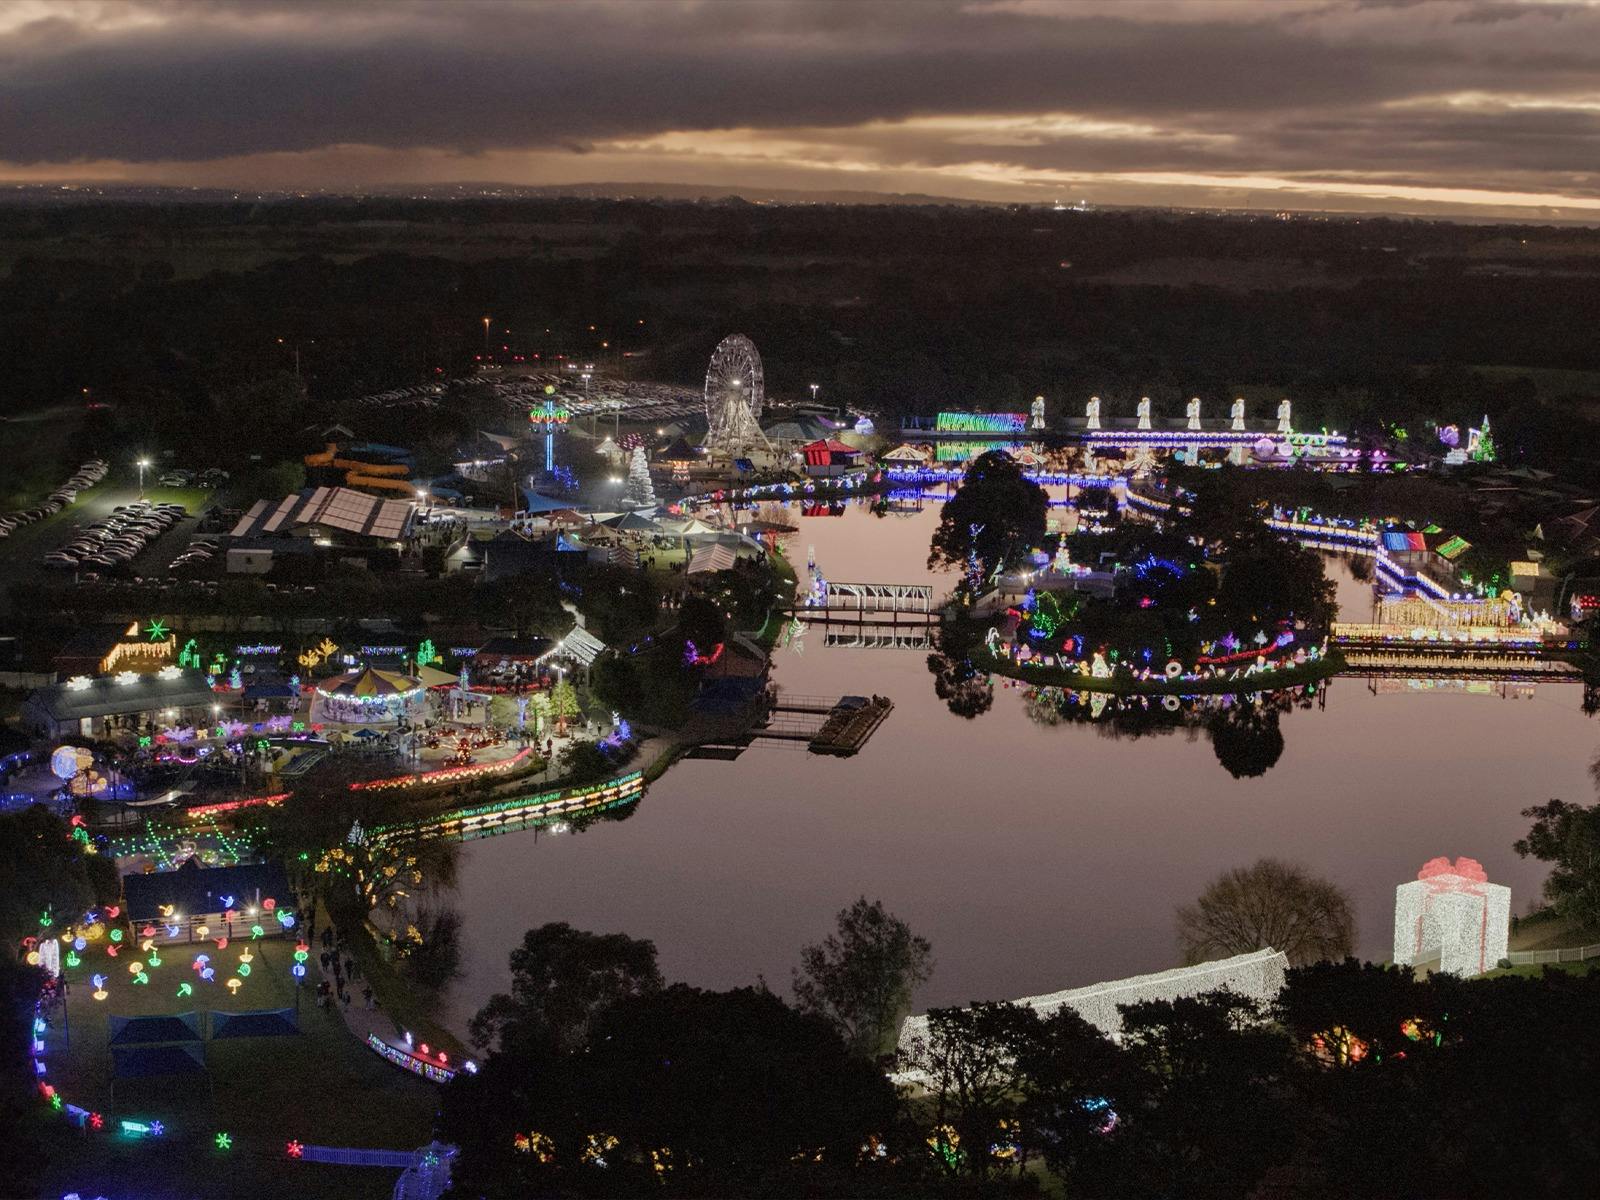 An aerial shot looking down on millions of lights at Adventure Park